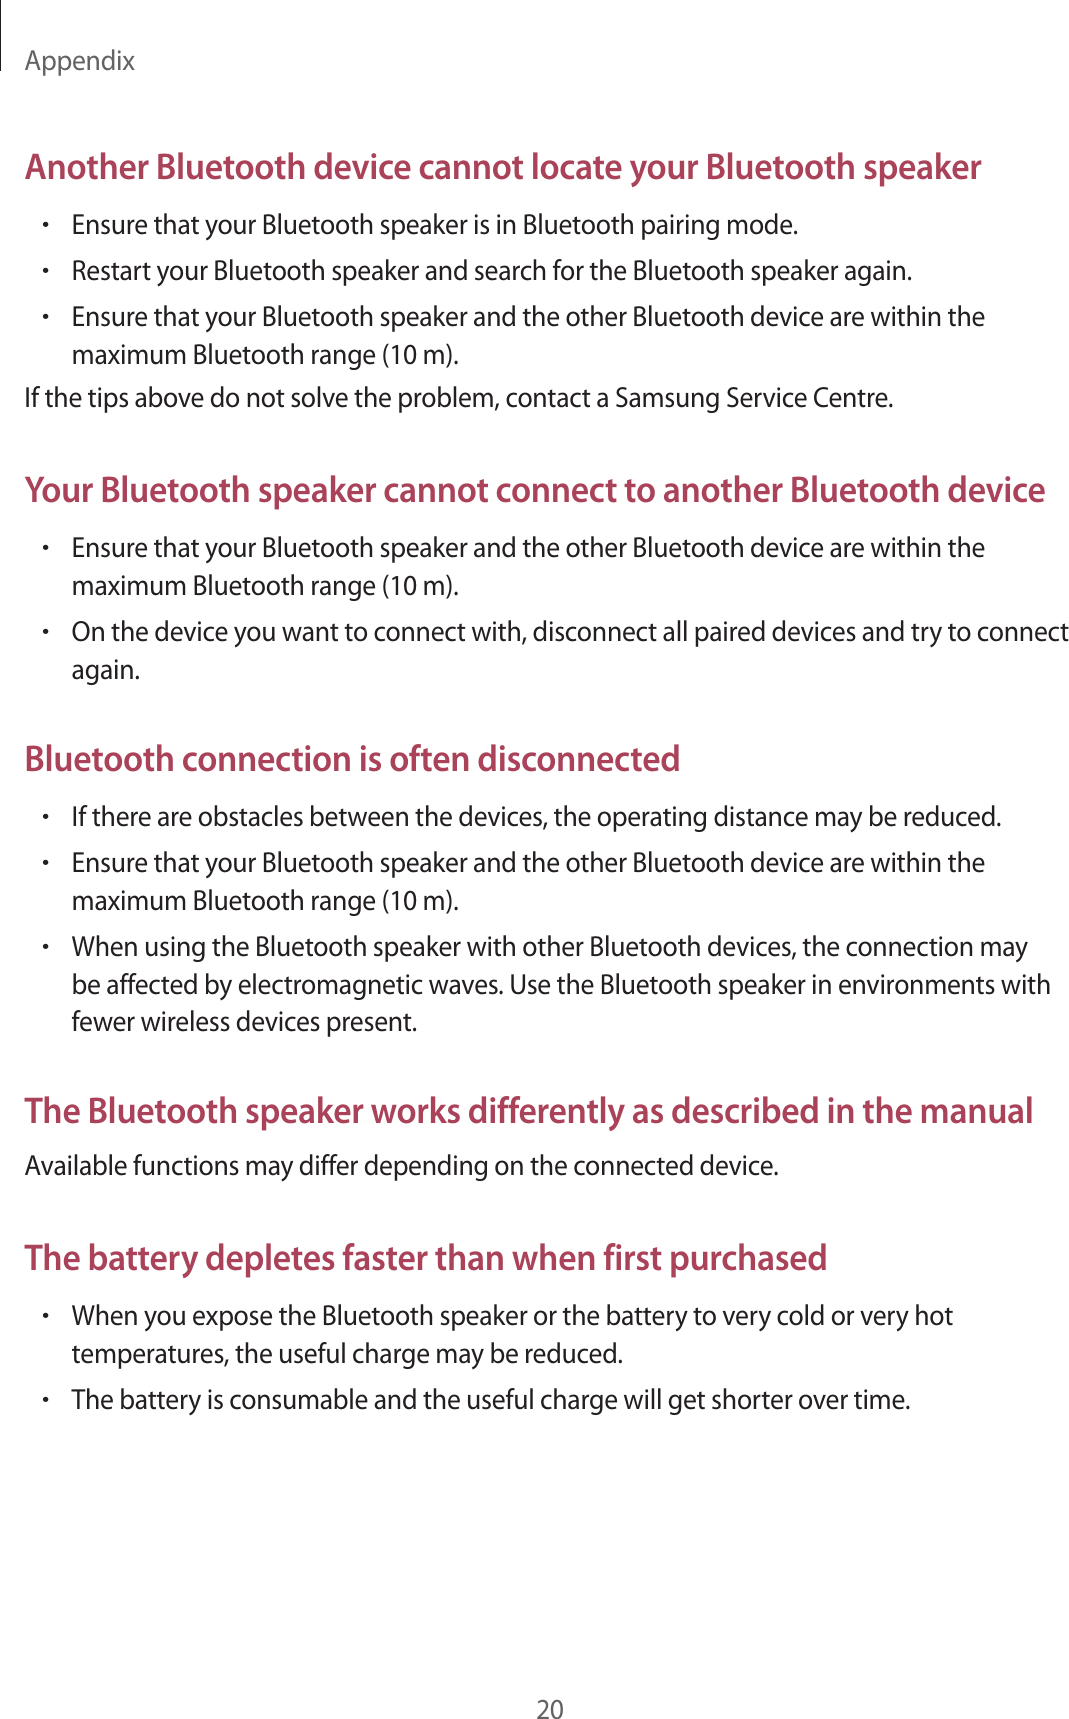 Appendix20Another Bluetooth device cannot locate your Bluetooth speaker•Ensure that your Bluetooth speaker is in Bluetooth pairing mode.•Restart your Bluetooth speaker and search for the Bluetooth speaker again.•Ensure that your Bluetooth speaker and the other Bluetooth device are within the maximum Bluetooth range (10 m).If the tips above do not solve the problem, contact a Samsung Service Centre.Your Bluetooth speaker cannot connect to another Bluetooth device•Ensure that your Bluetooth speaker and the other Bluetooth device are within the maximum Bluetooth range (10 m).•On the device you want to connect with, disconnect all paired devices and try to connect again.Bluetooth connection is often disconnected•If there are obstacles between the devices, the operating distance may be reduced.•Ensure that your Bluetooth speaker and the other Bluetooth device are within the maximum Bluetooth range (10 m).•When using the Bluetooth speaker with other Bluetooth devices, the connection may be affected by electromagnetic waves. Use the Bluetooth speaker in environments with fewer wireless devices present.The Bluetooth speaker works differently as described in the manualAvailable functions may differ depending on the connected device.The battery depletes faster than when first purchased•When you expose the Bluetooth speaker or the battery to very cold or very hot temperatures, the useful charge may be reduced.•The battery is consumable and the useful charge will get shorter over time.